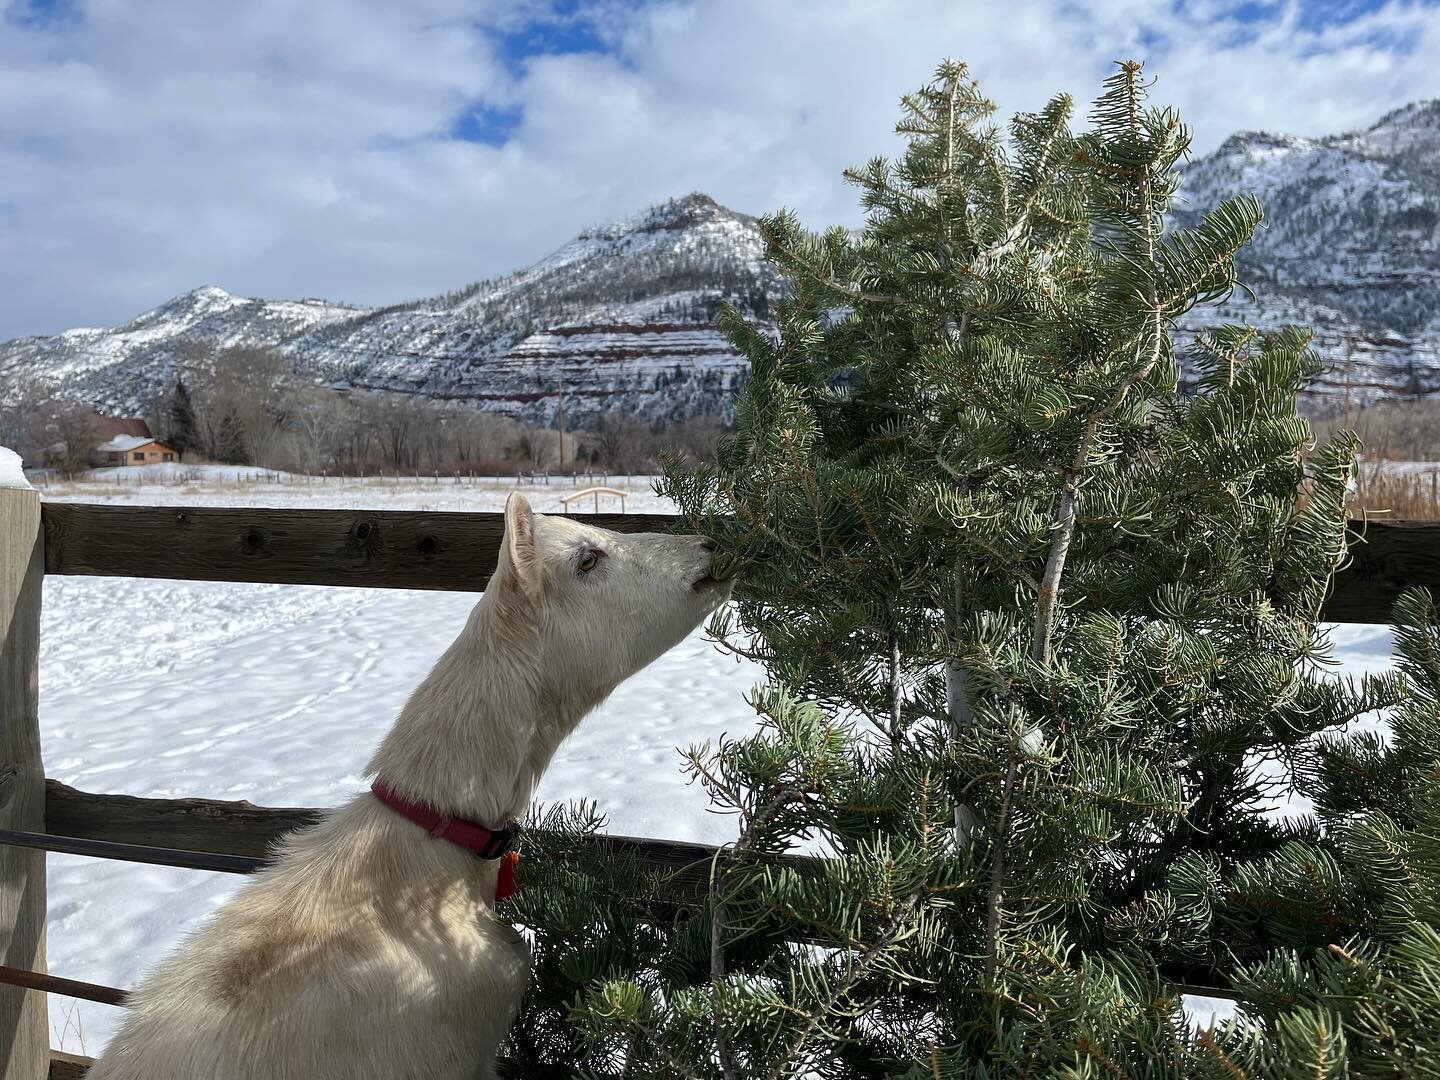 We loooooove our Christmas trees! Nom nom nom! Thank you to everyone who has contributed! If you&rsquo;d like to take part in our Christmas Tree Removal Service and live in the Durango area, shoot us a message on Instagram or Facebook! We charge $20 